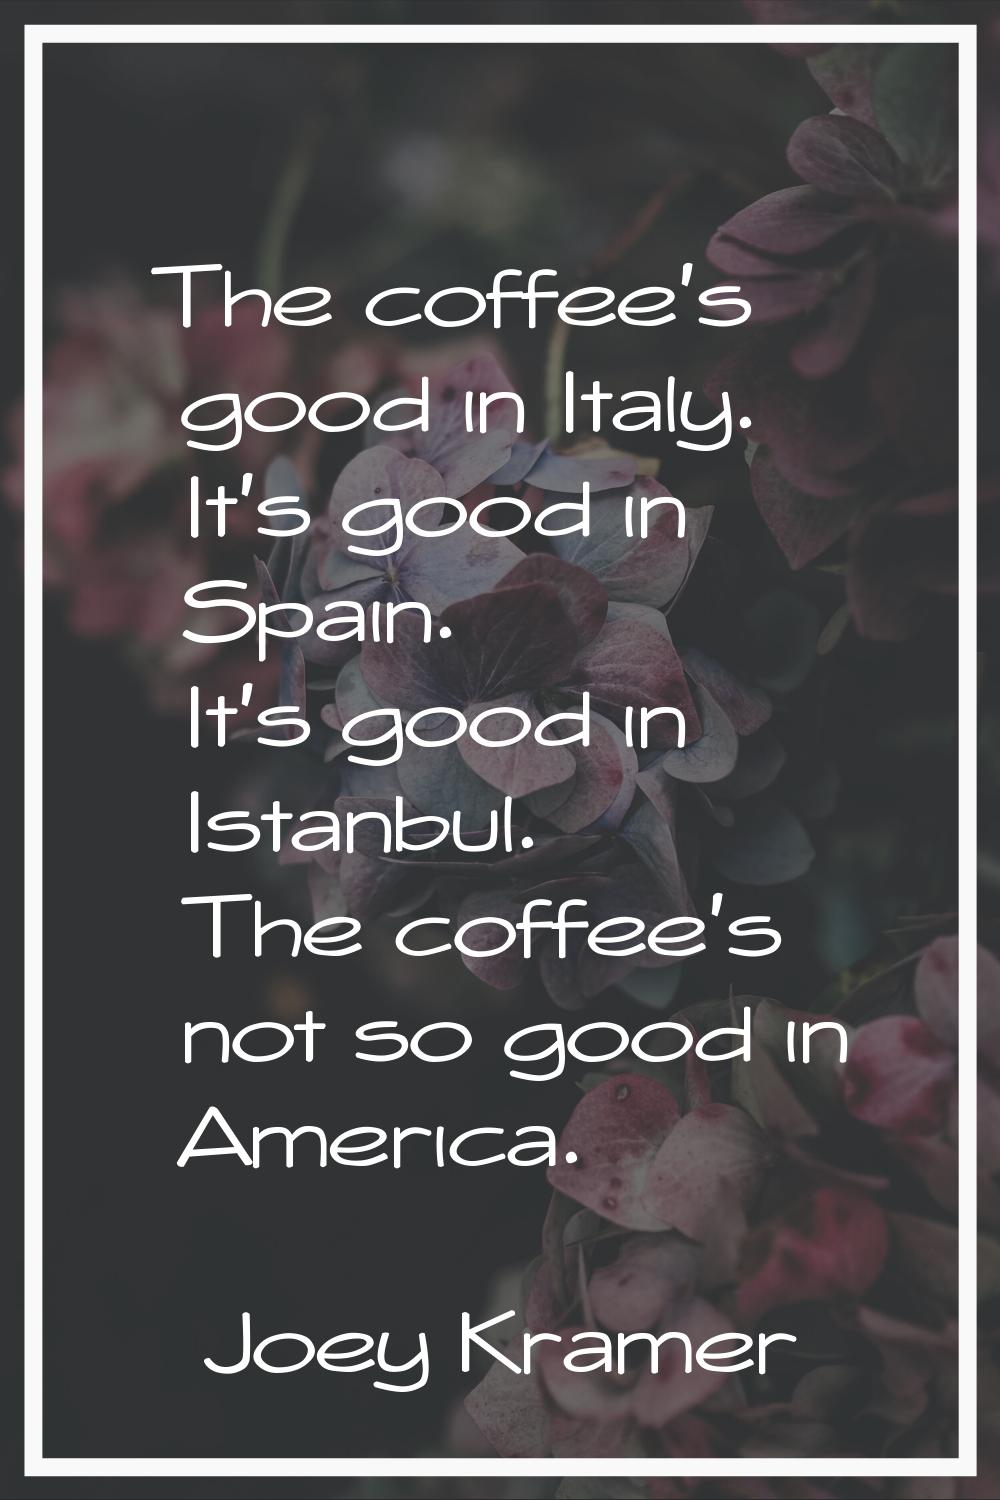 The coffee's good in Italy. It's good in Spain. It's good in Istanbul. The coffee's not so good in 